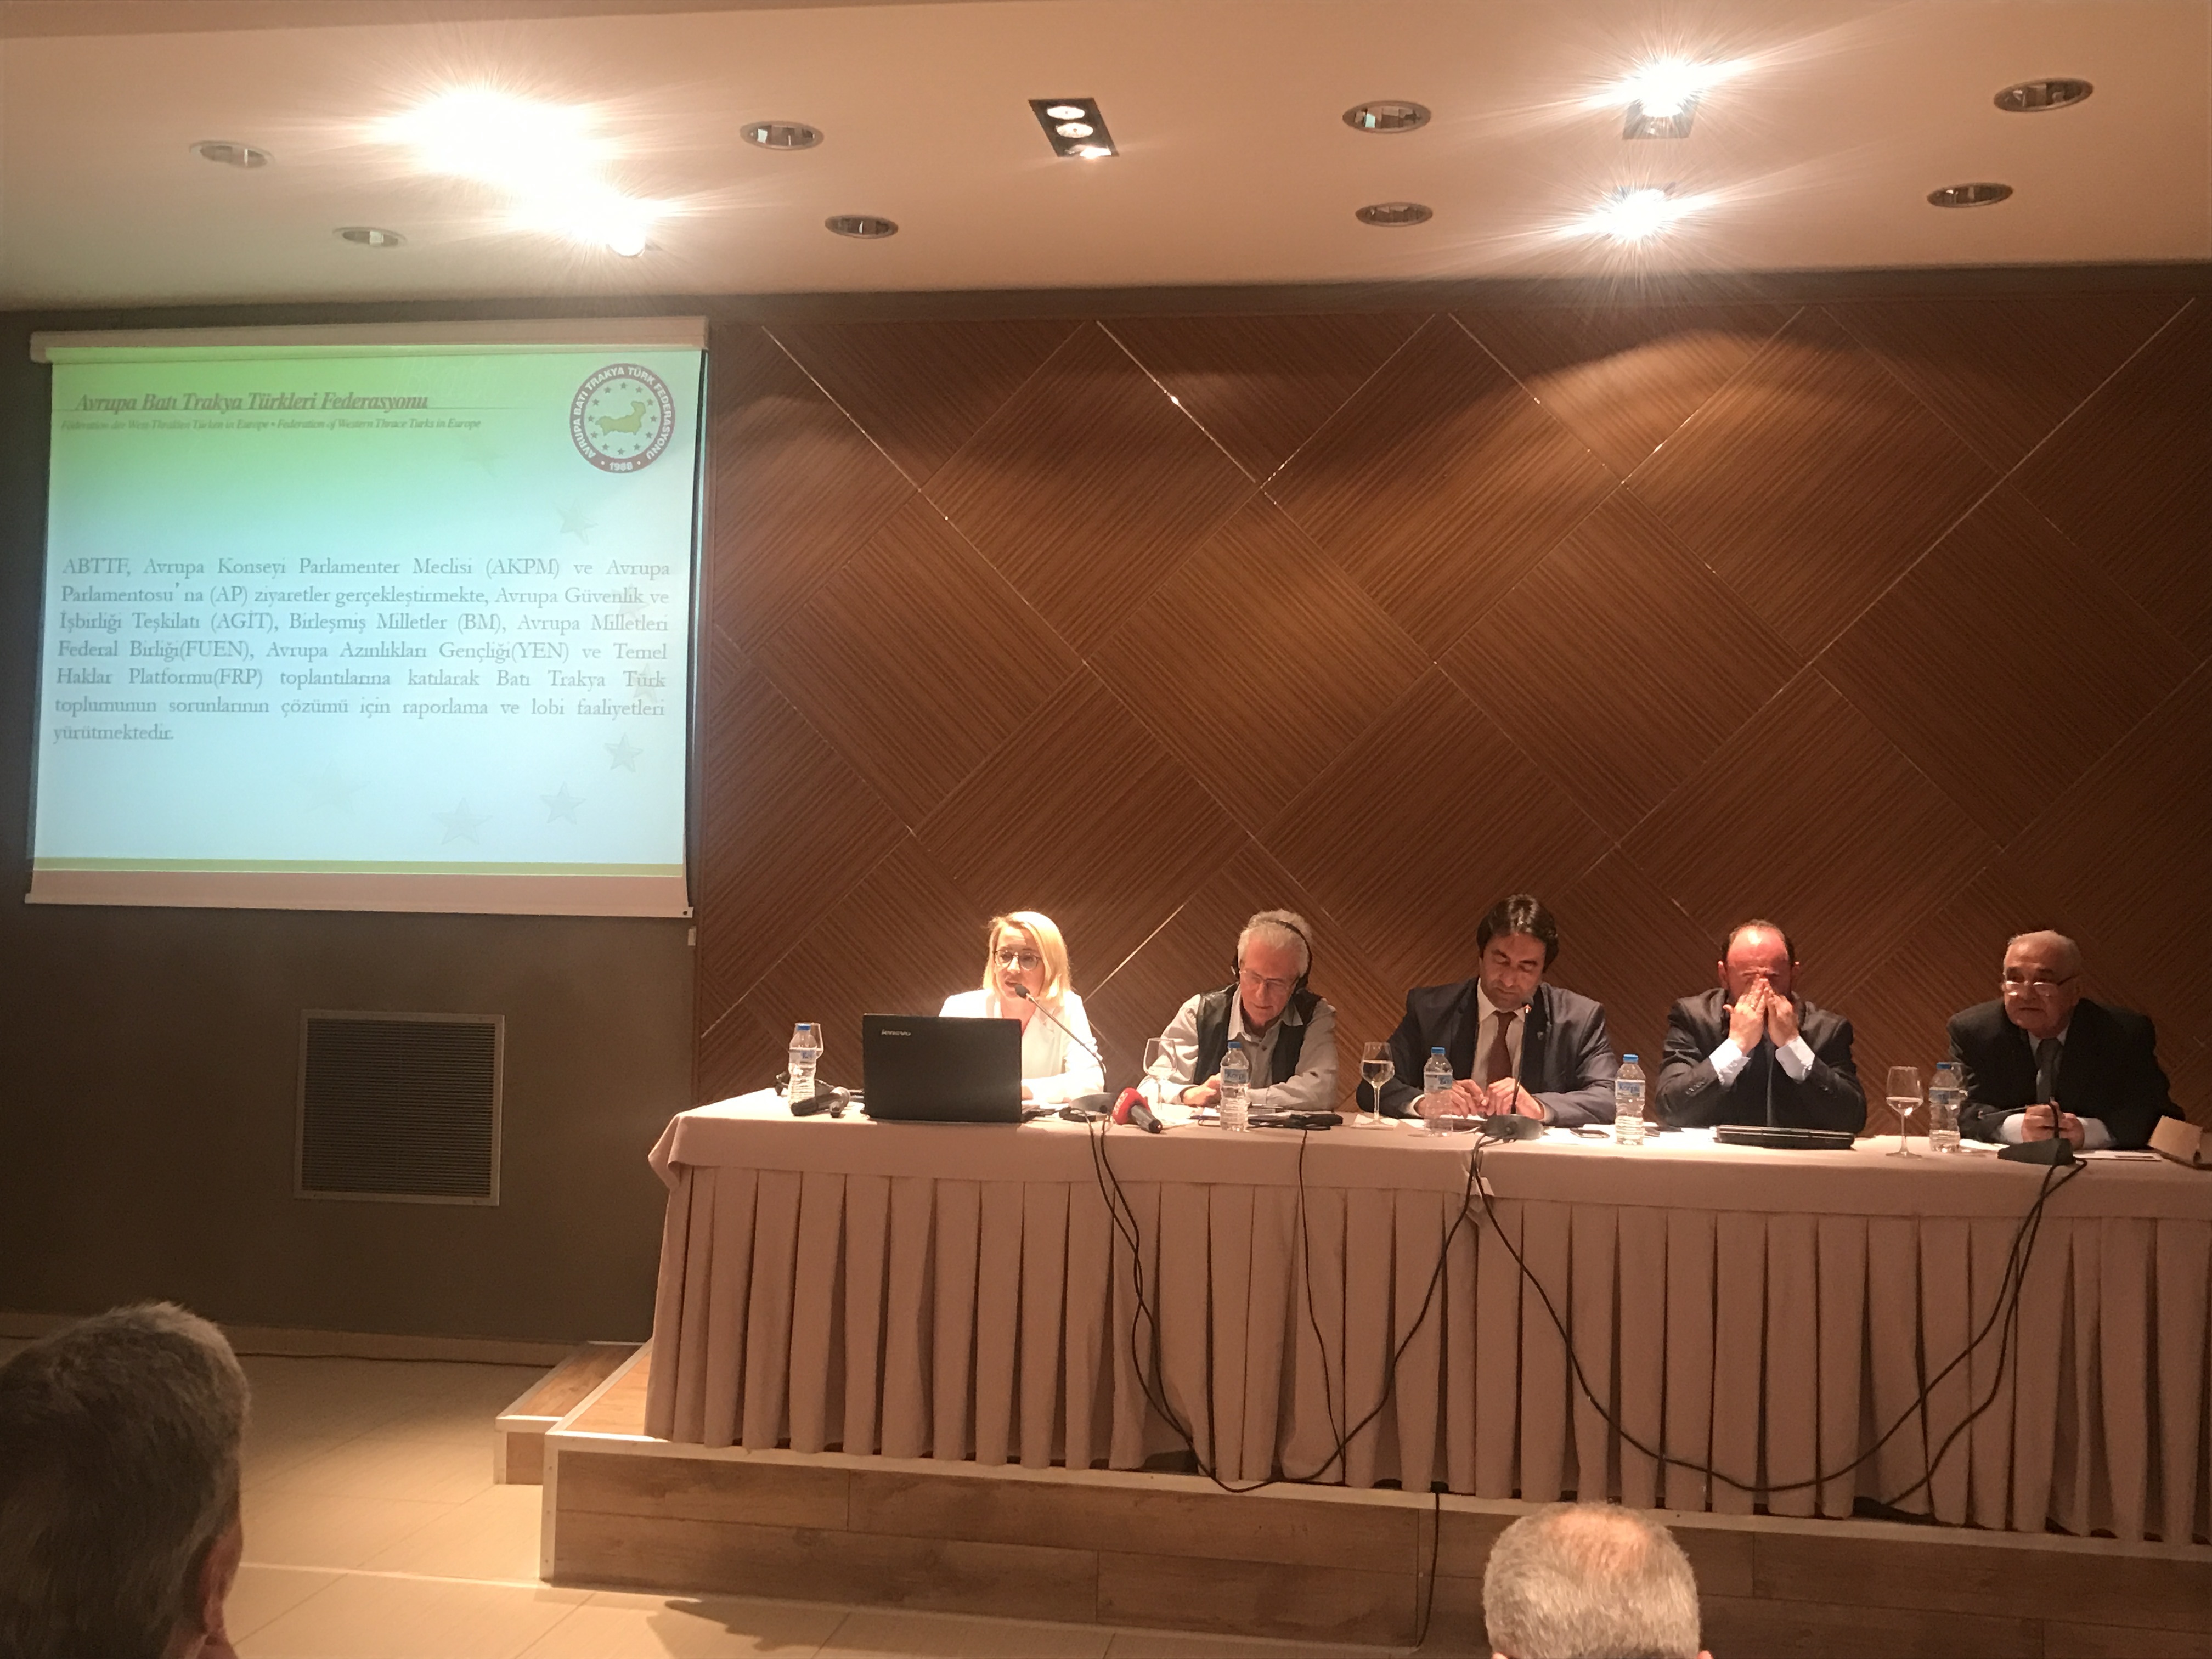 Conference by Xanthi Turkish Union in the 10th year of ECtHR judgment